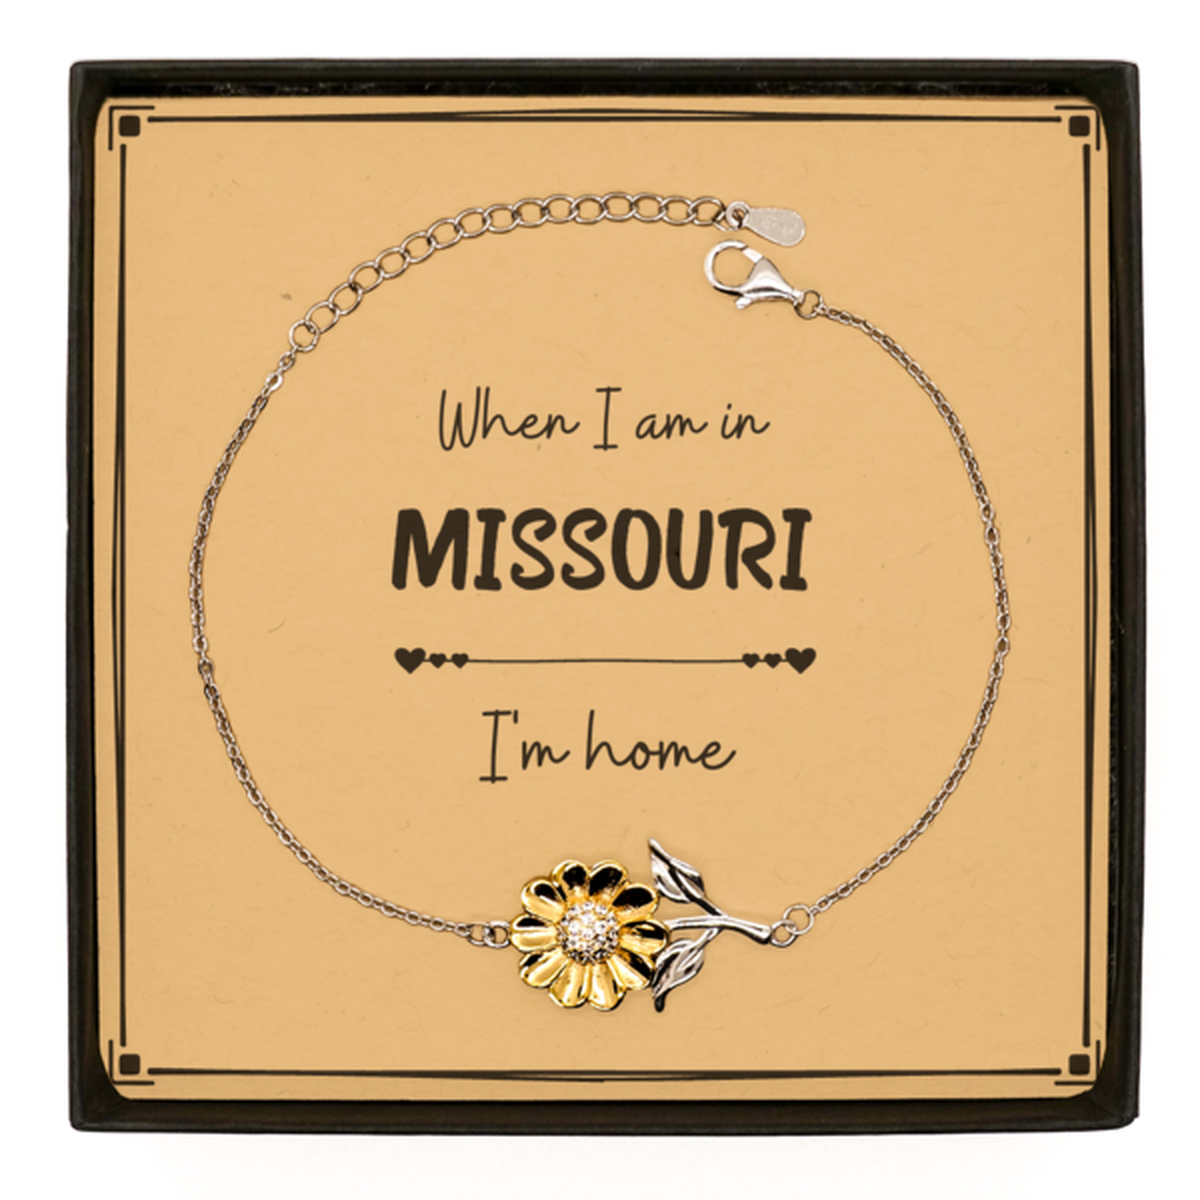 When I am in Missouri I'm home Sunflower Bracelet, Message Card Gifts For Missouri, State Missouri Birthday Gifts for Friends Coworker